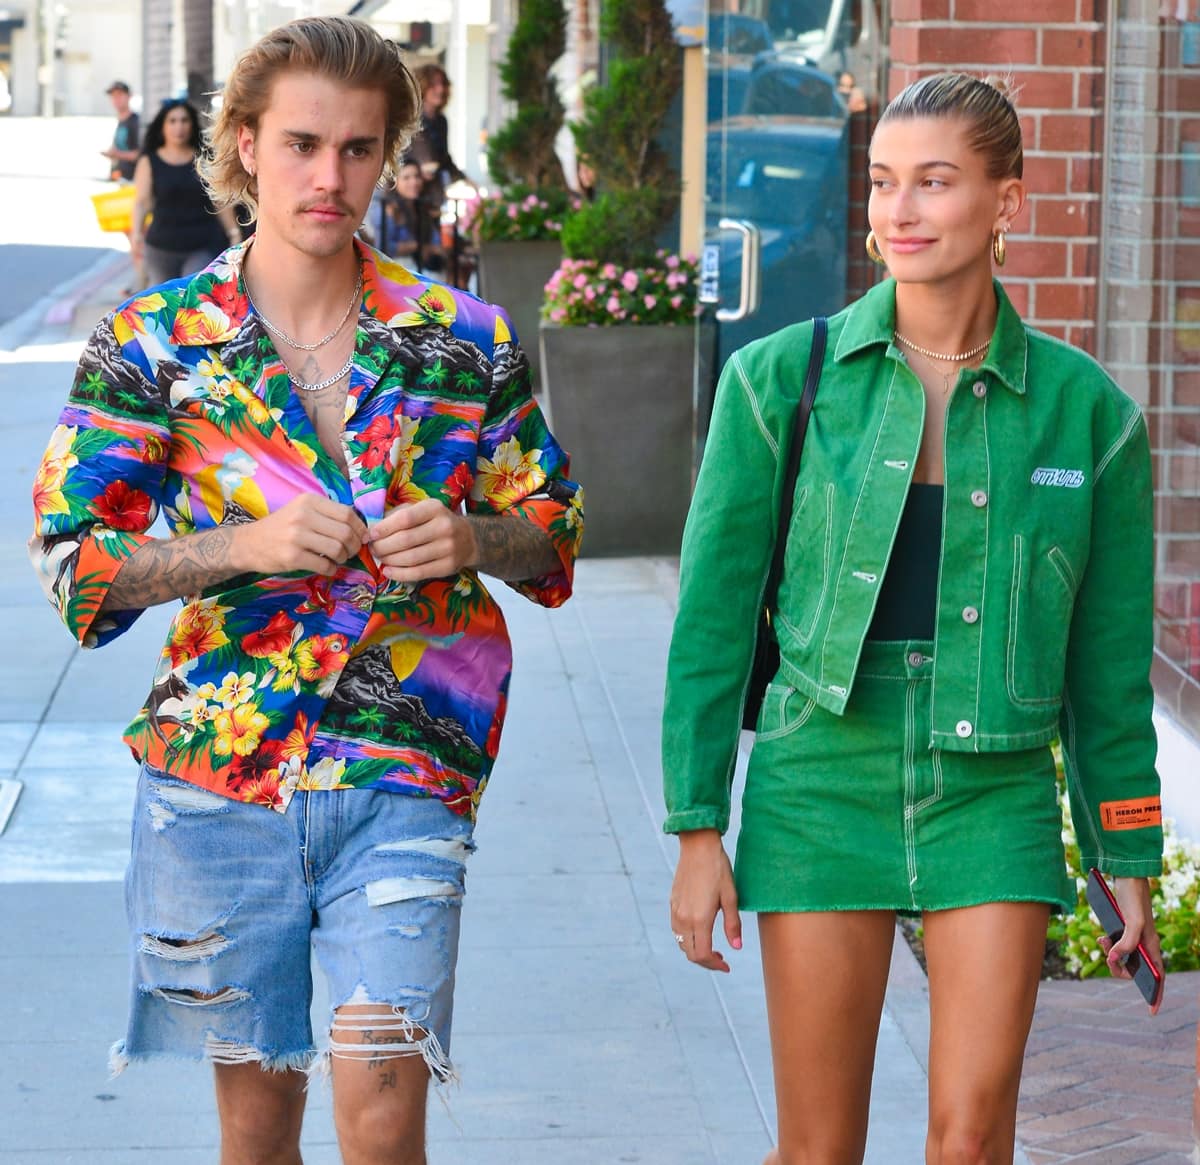 Hailey Baldwin in a green denim jacket and her boyfriend Justin Bieber head to a doctor’s appointment